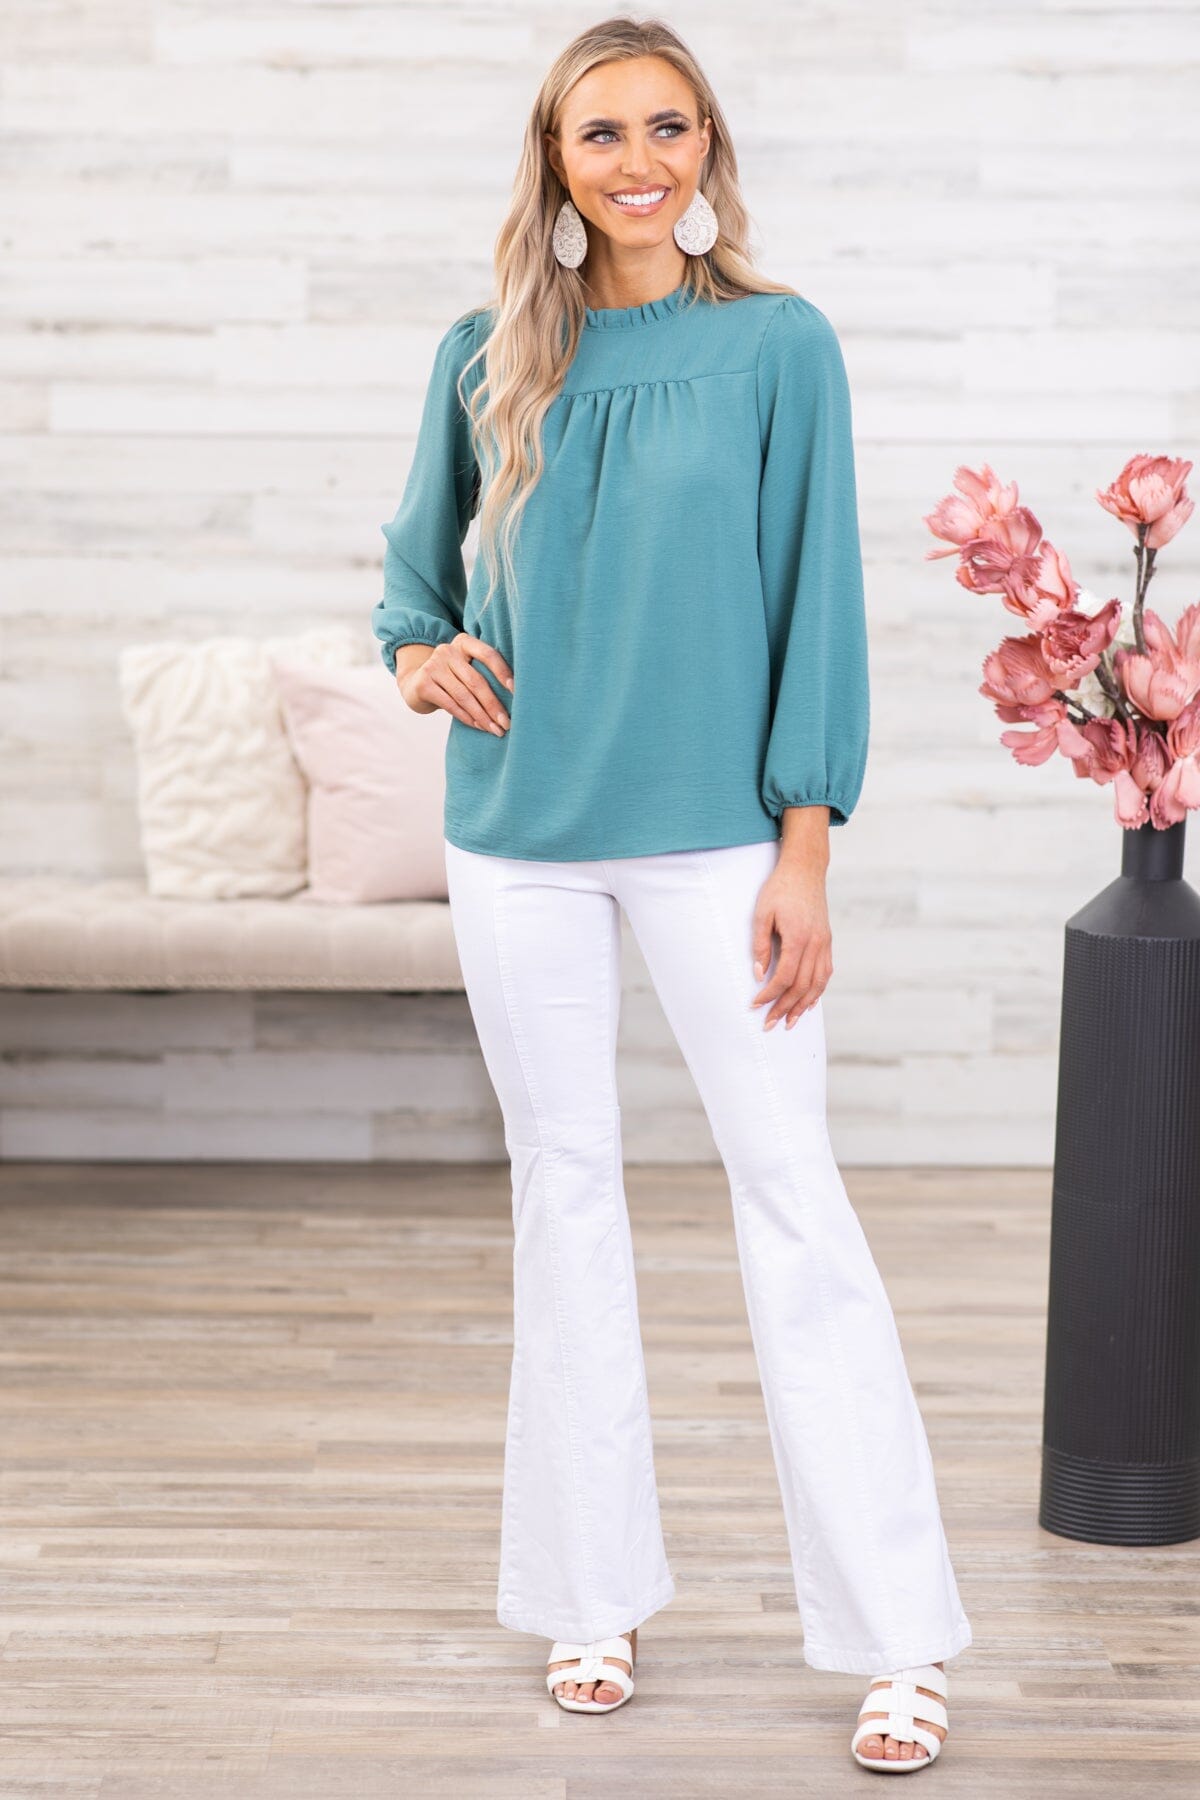 Teal Ruffle Trim Long Sleeve Top - Filly Flair